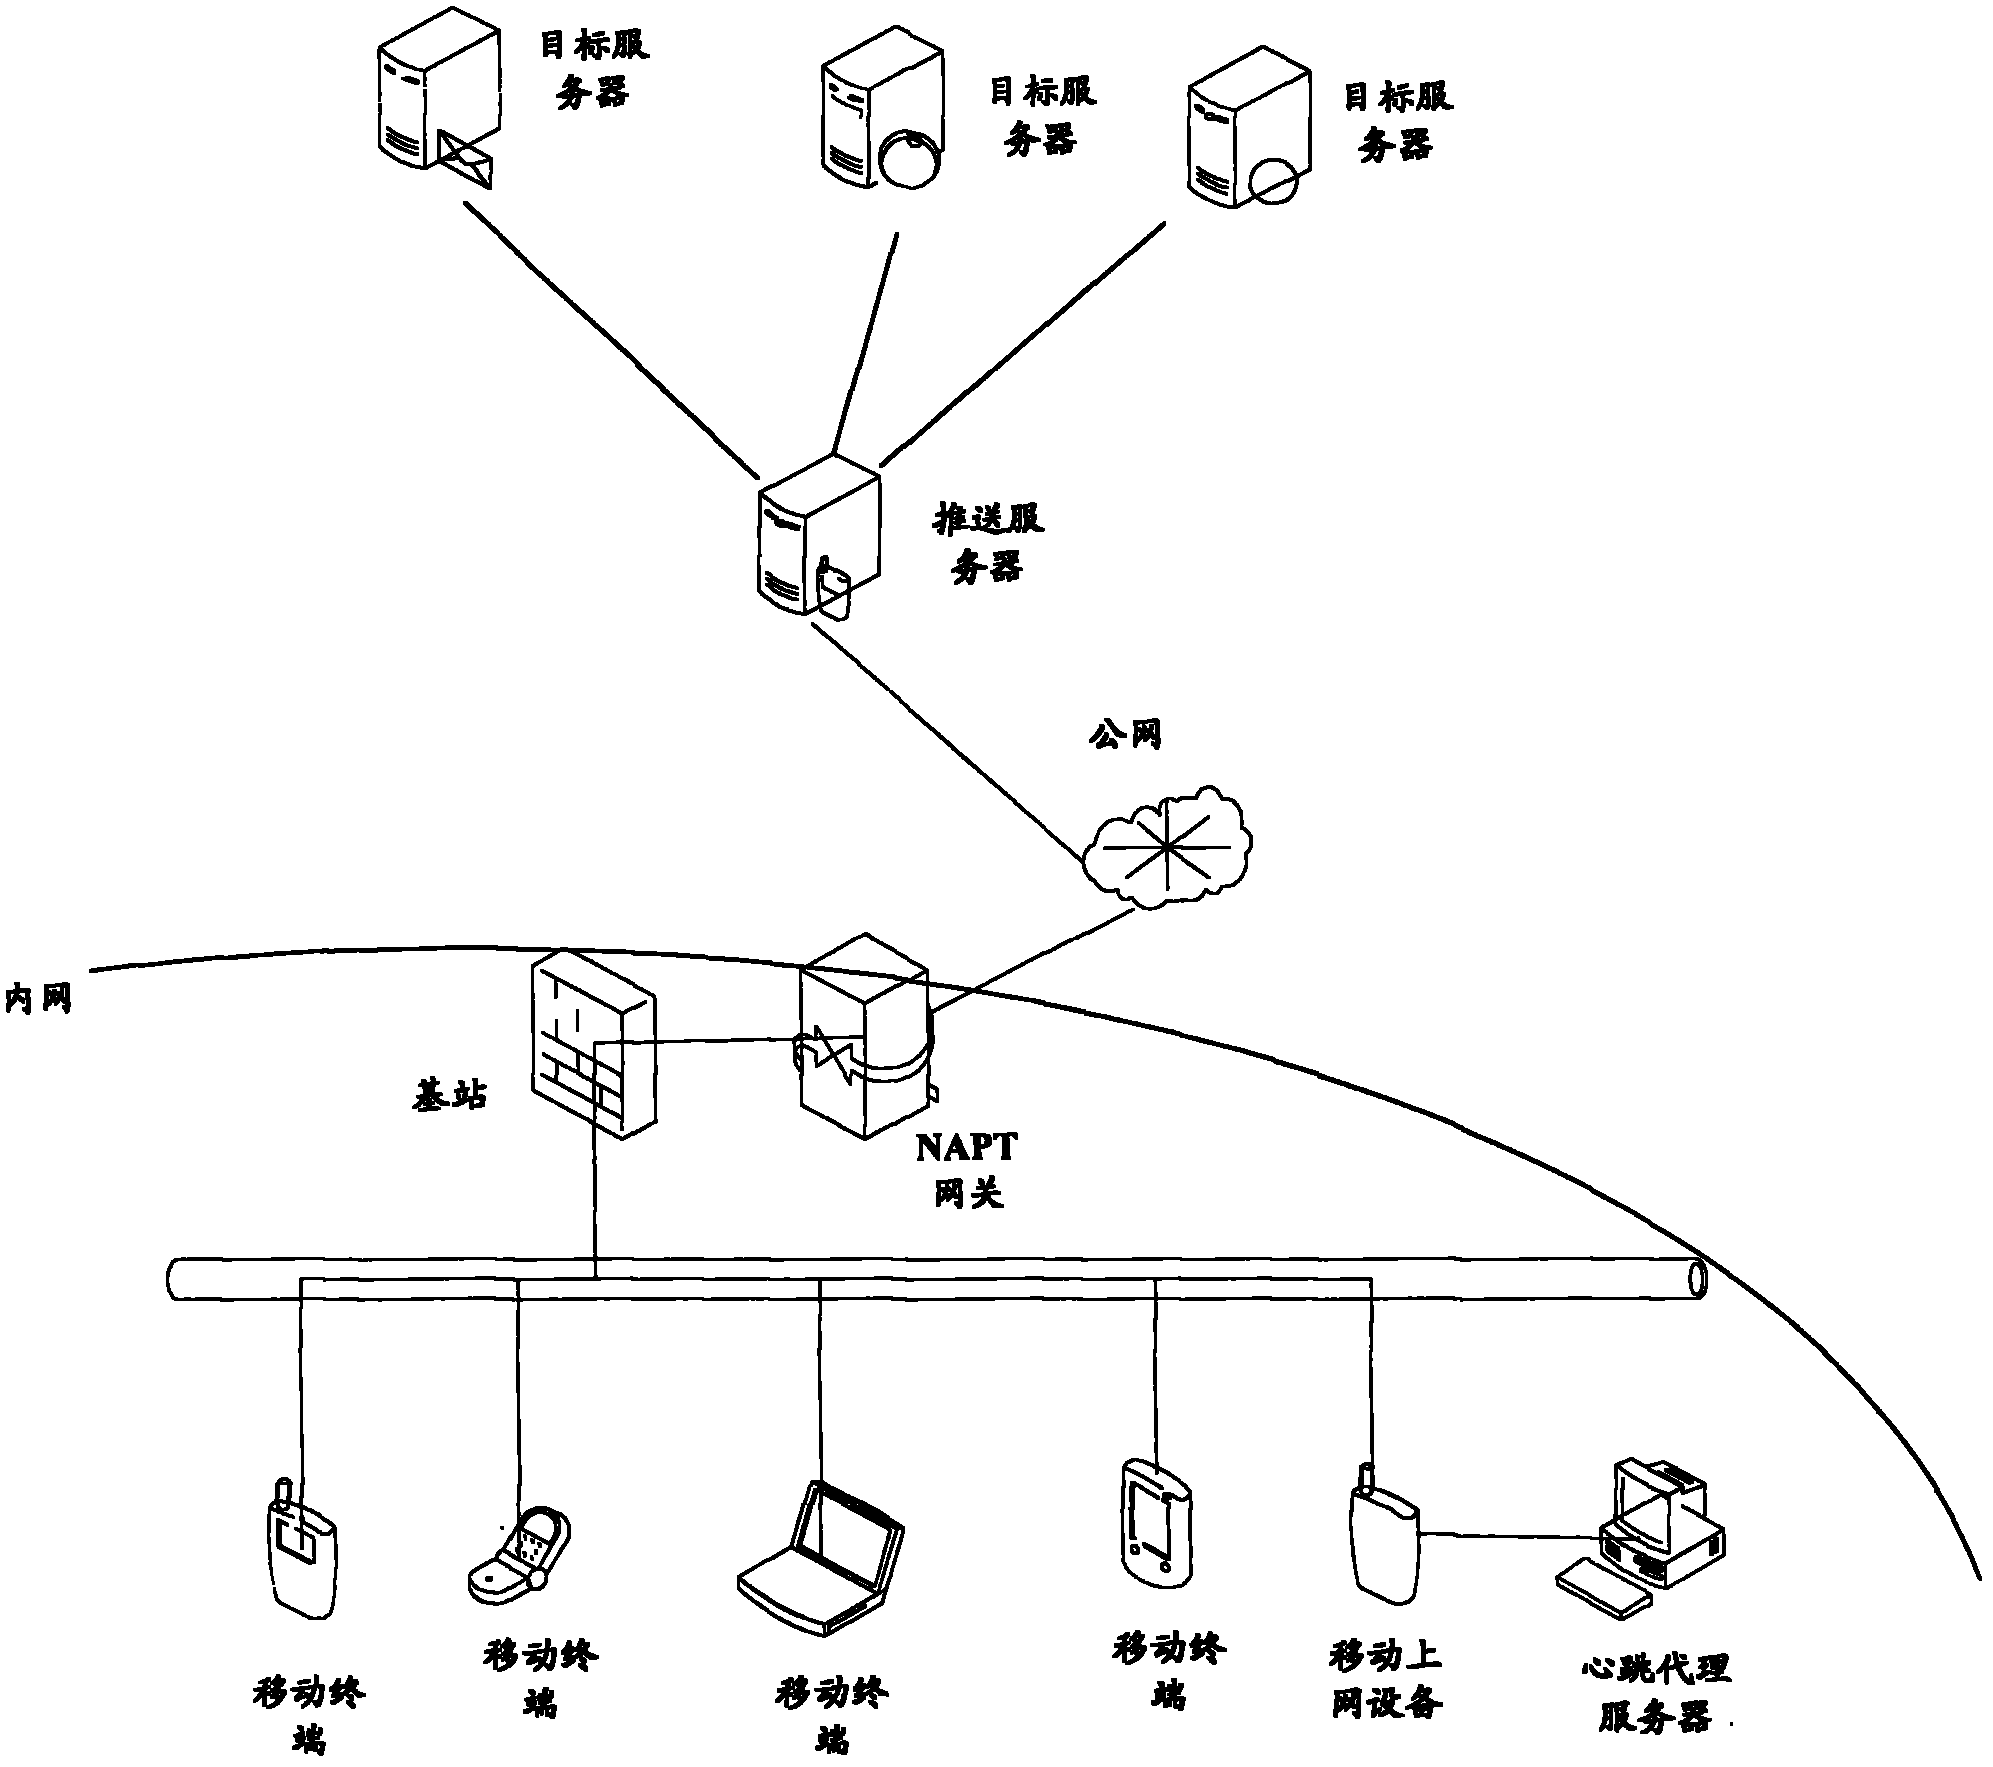 System and method for realizing information push of mobile terminal